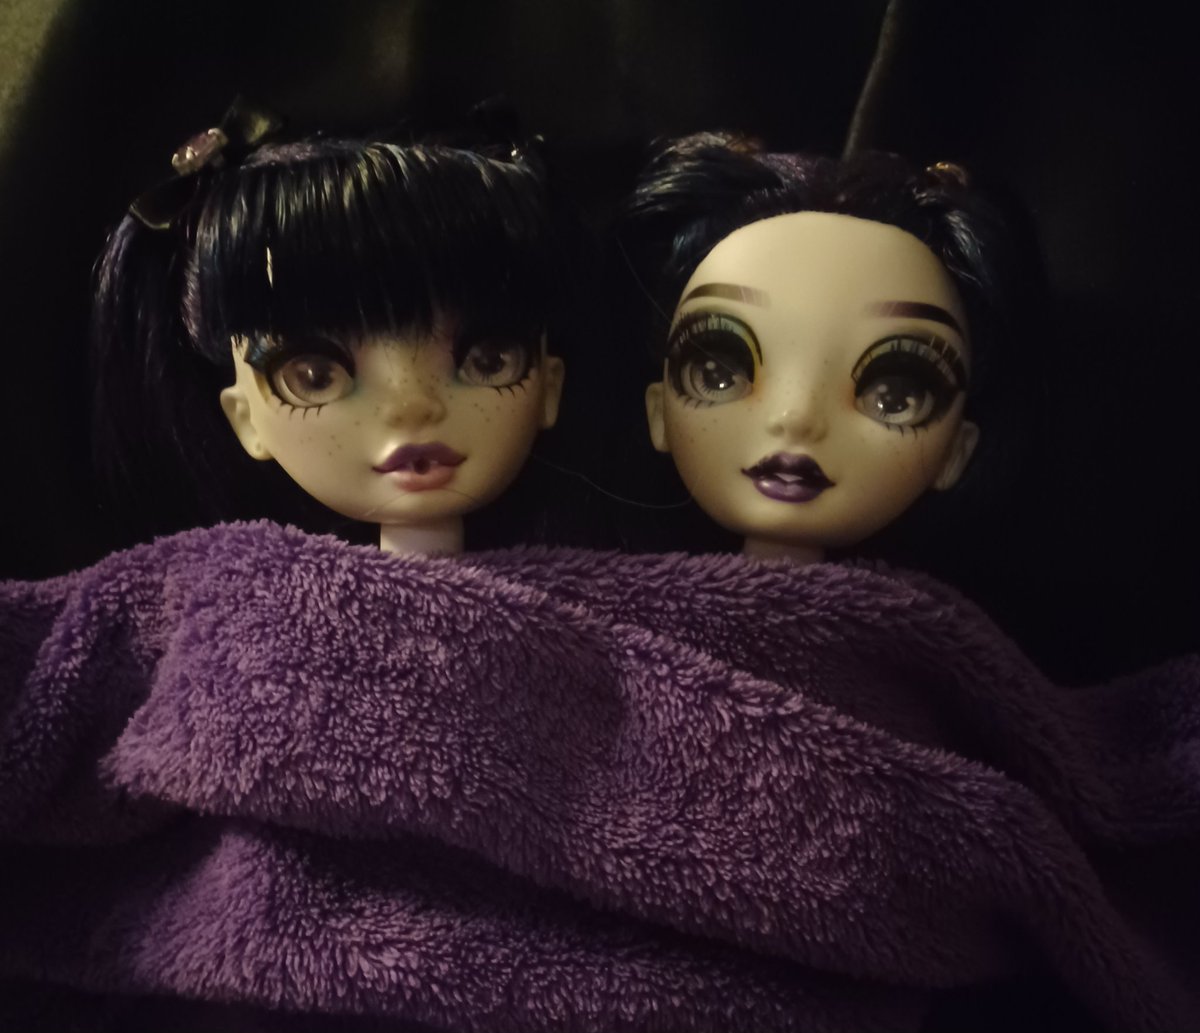 Its raining where I'm at, and N and V just got their monthly bath, so they wanted to rest under their favorite blanket for a bit. Aren't they adorable? At least there is a new Rainbow High episode to look forward to tomorrow, even if it's just more of RH Season 5!🖤💜